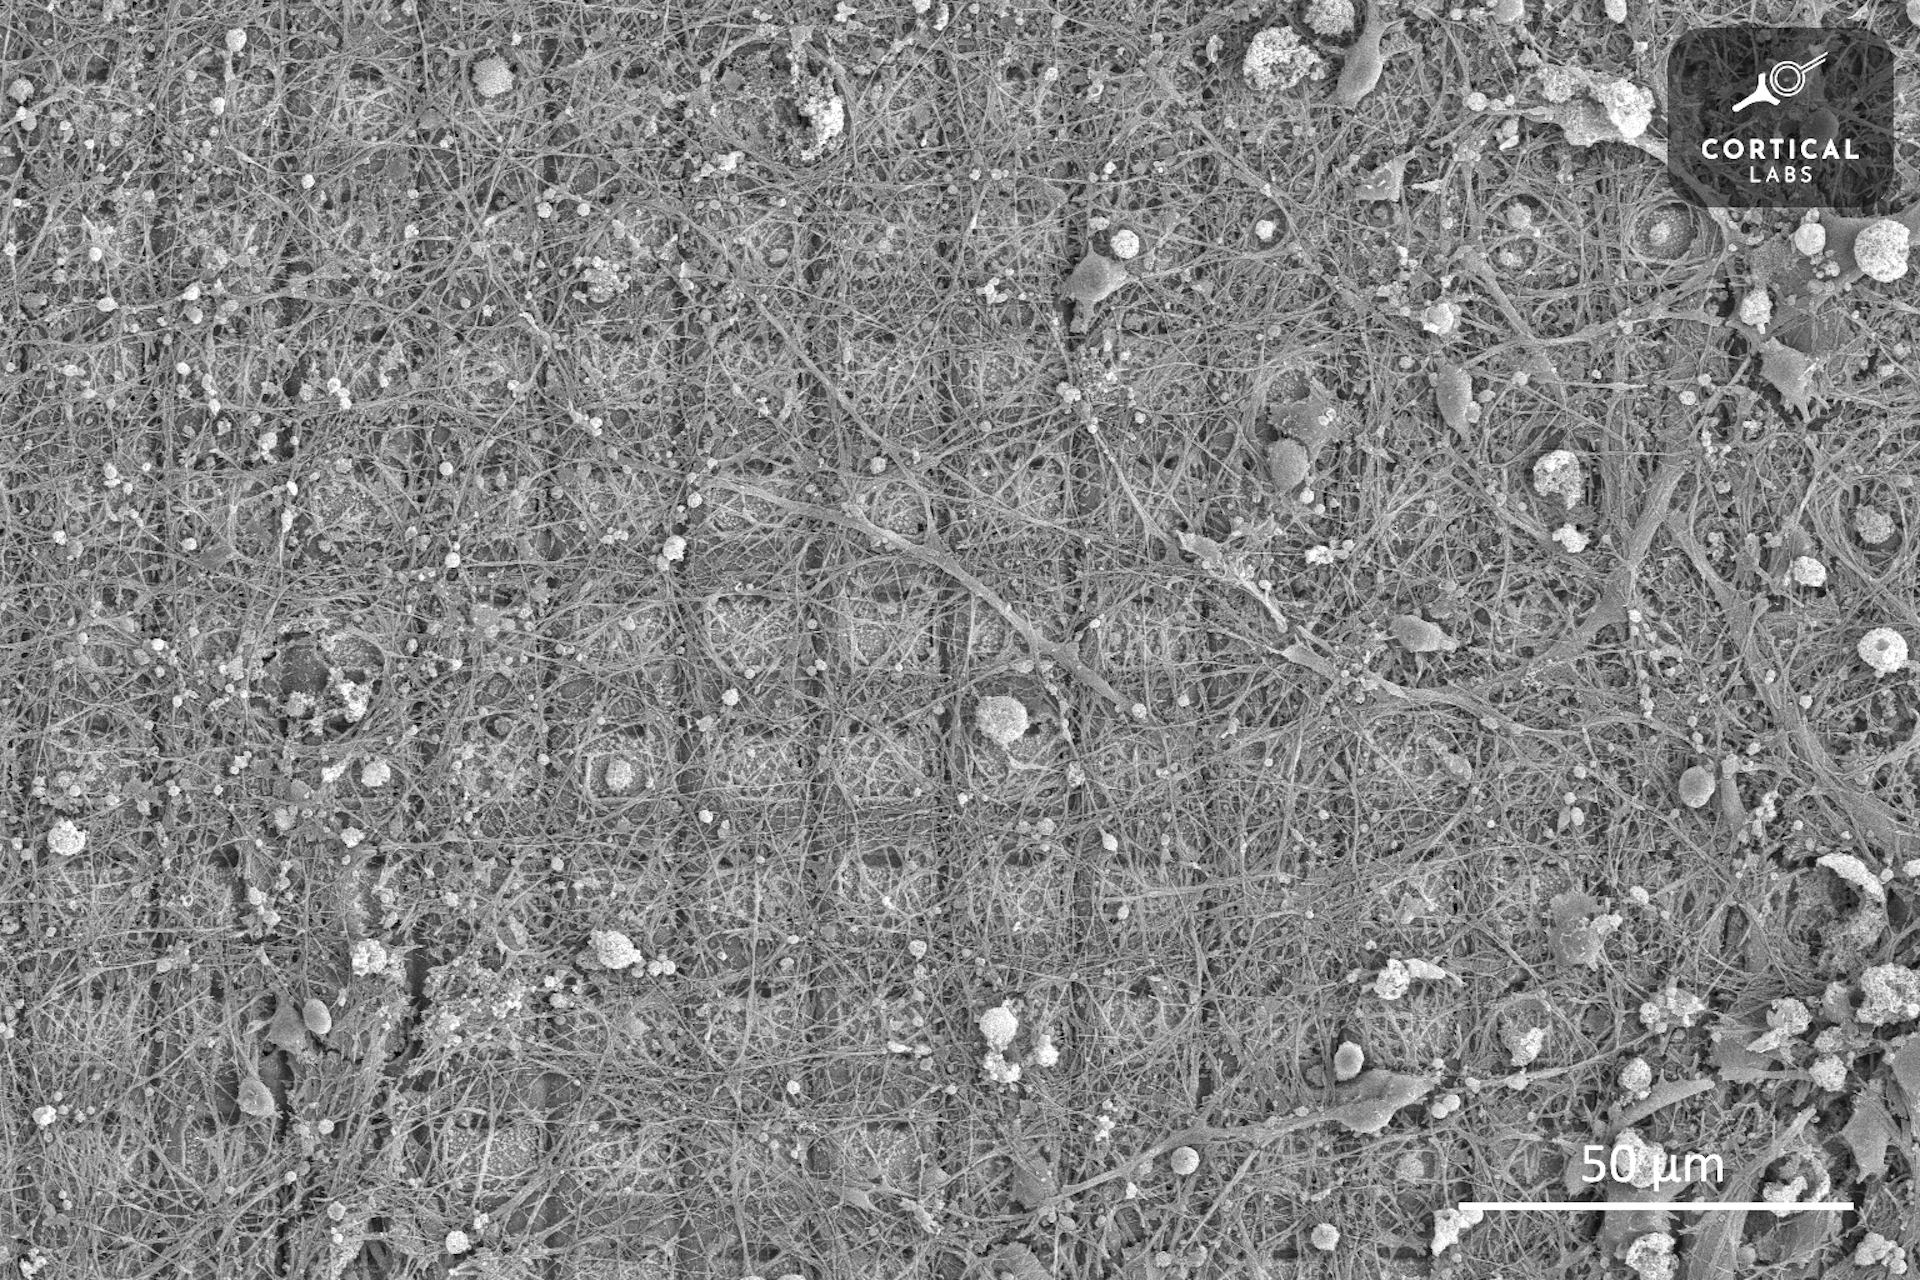 A microscope image shows a grid of squares covered with an irregular growth of strand-like neurons.